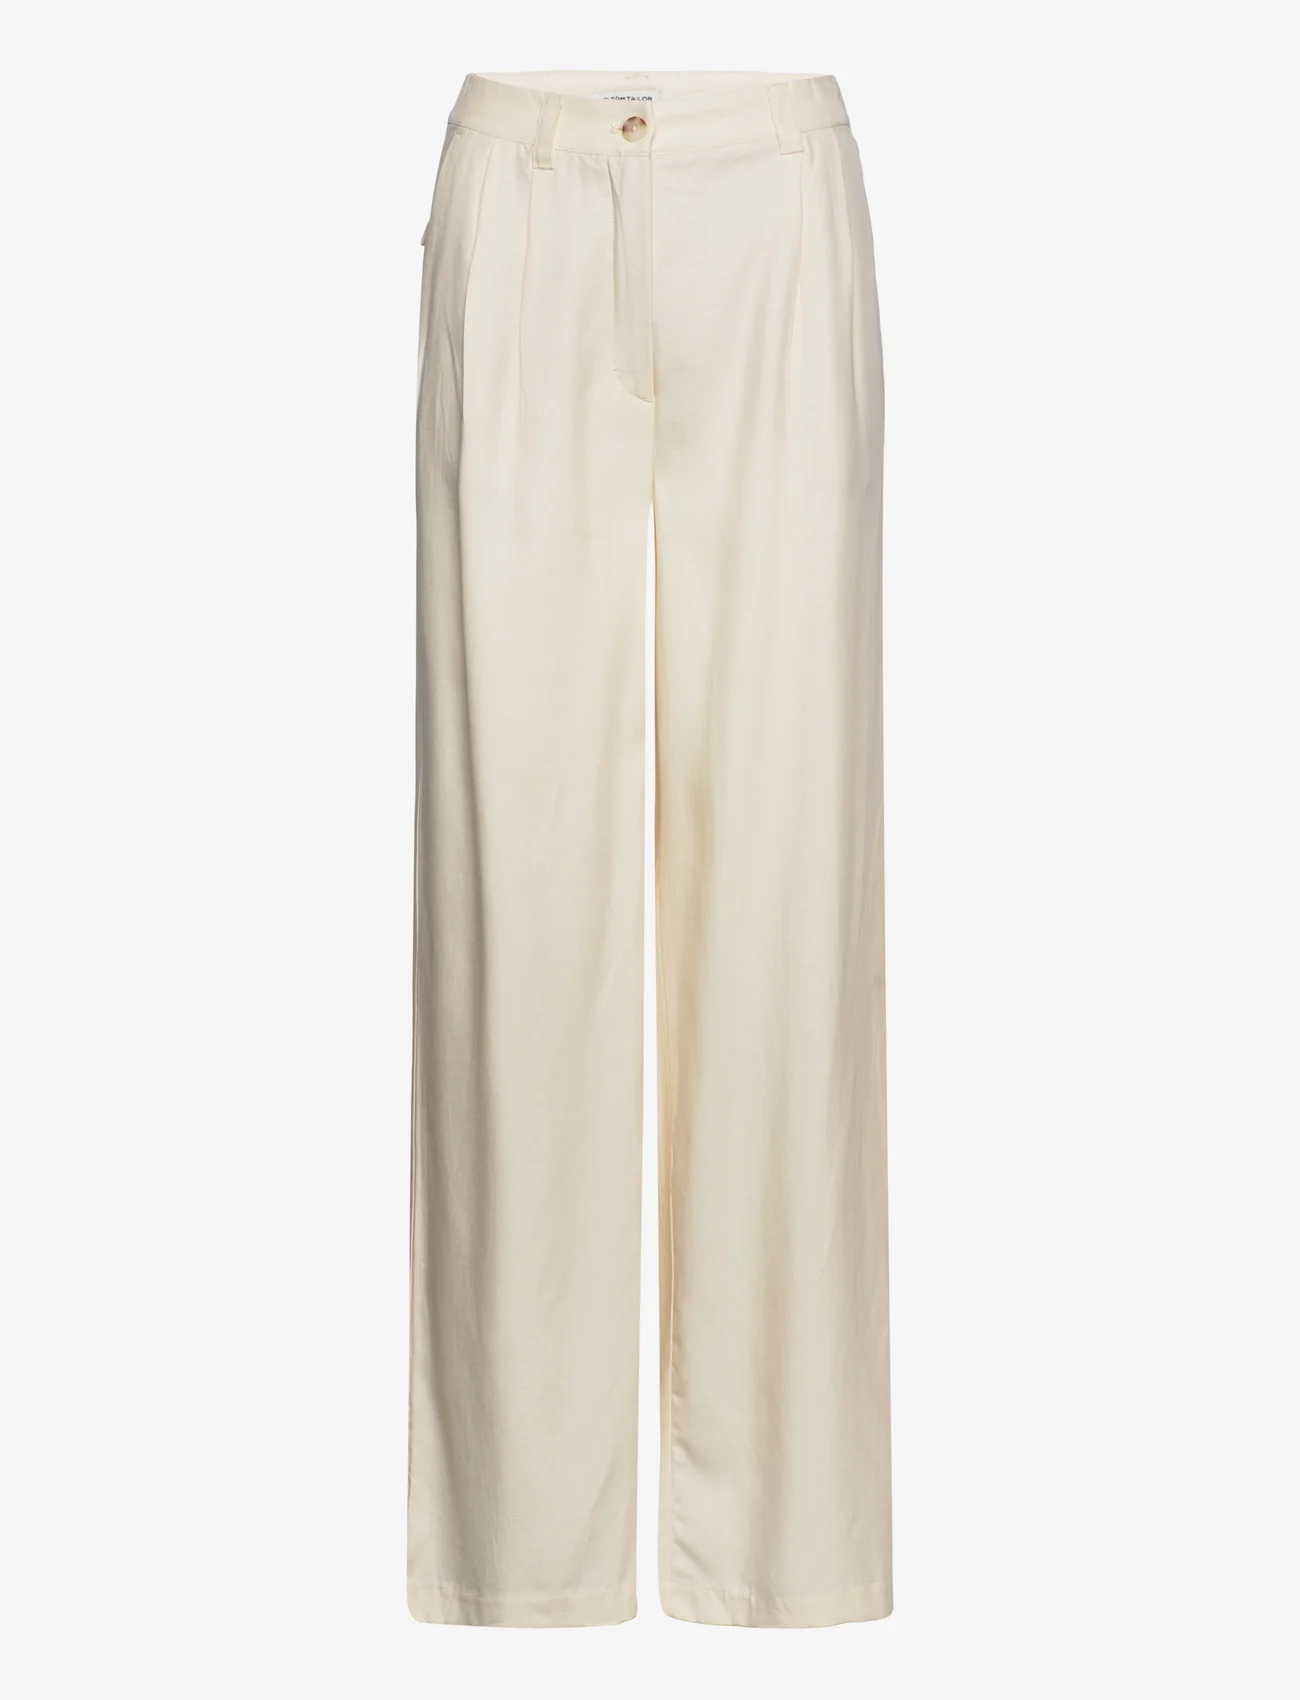 Tom Tailor - Tom Tailor Lea straight Tencel - party wear at outlet prices - ivory ecru - 0